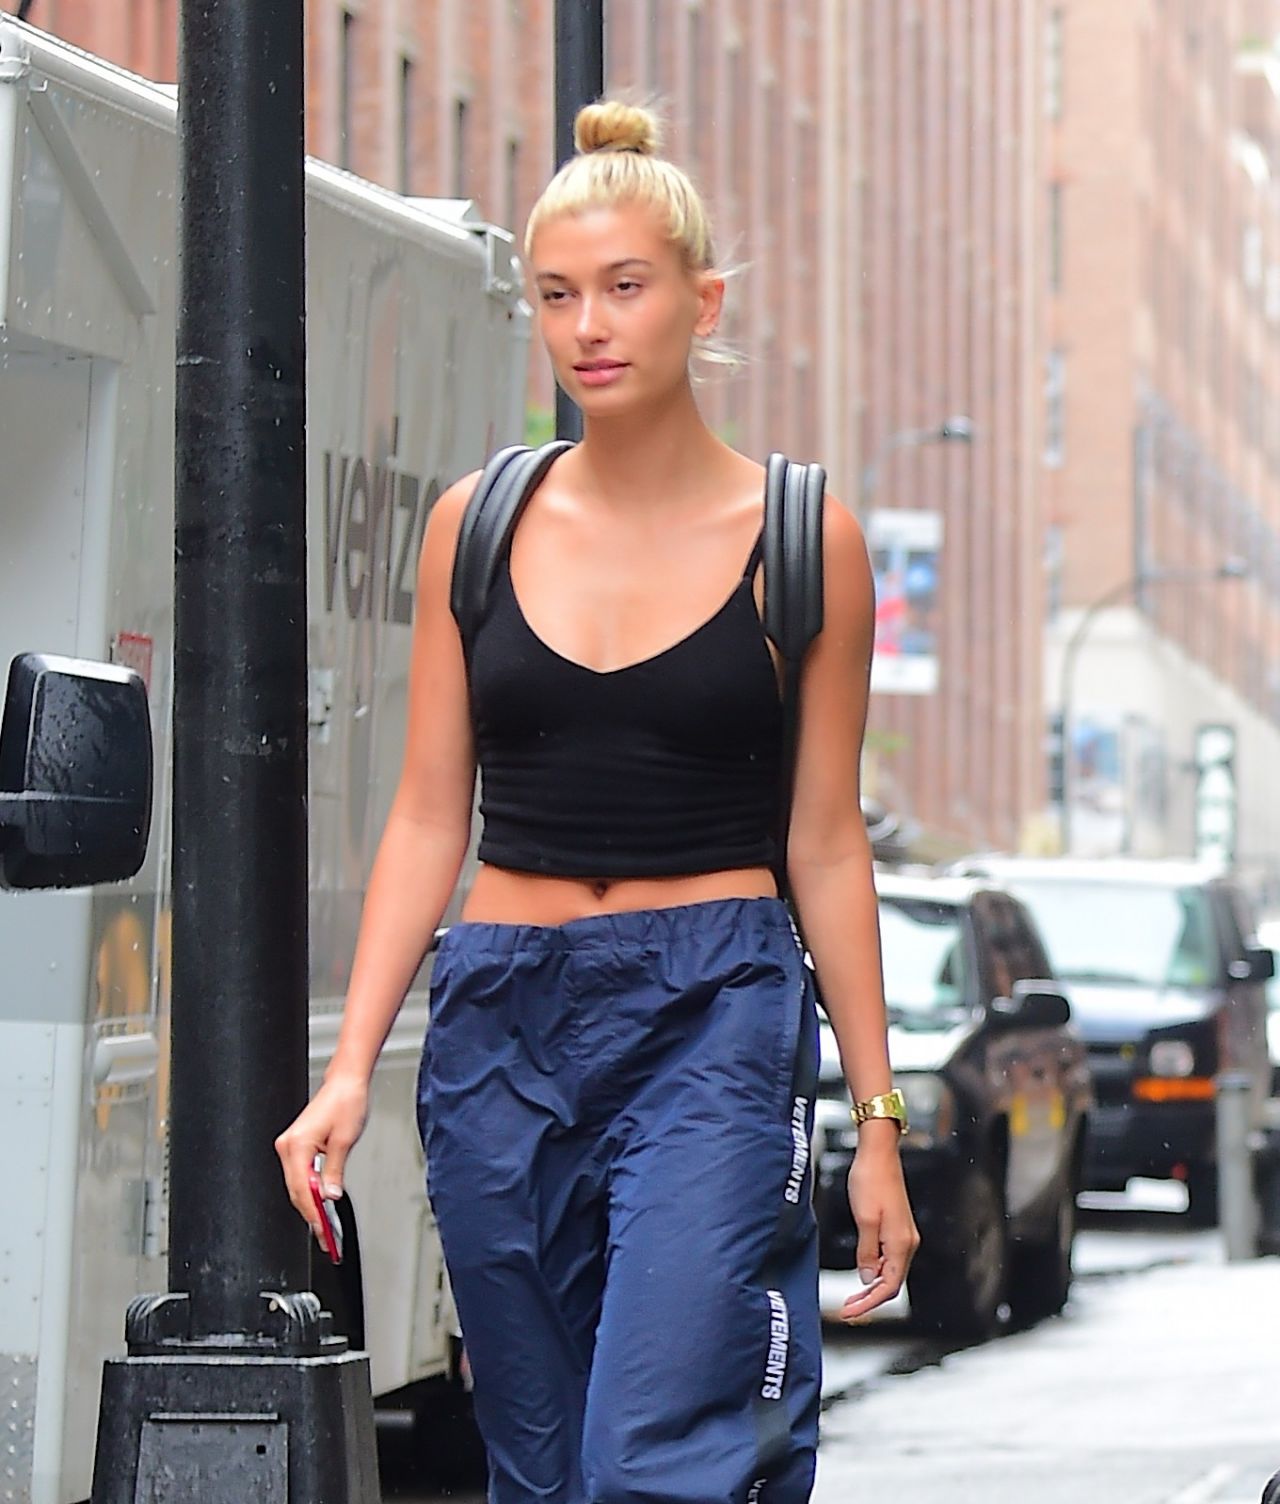 hailey-baldwin-and-justin-bieber-out-in-nyc-07-06-2018-5.jpg